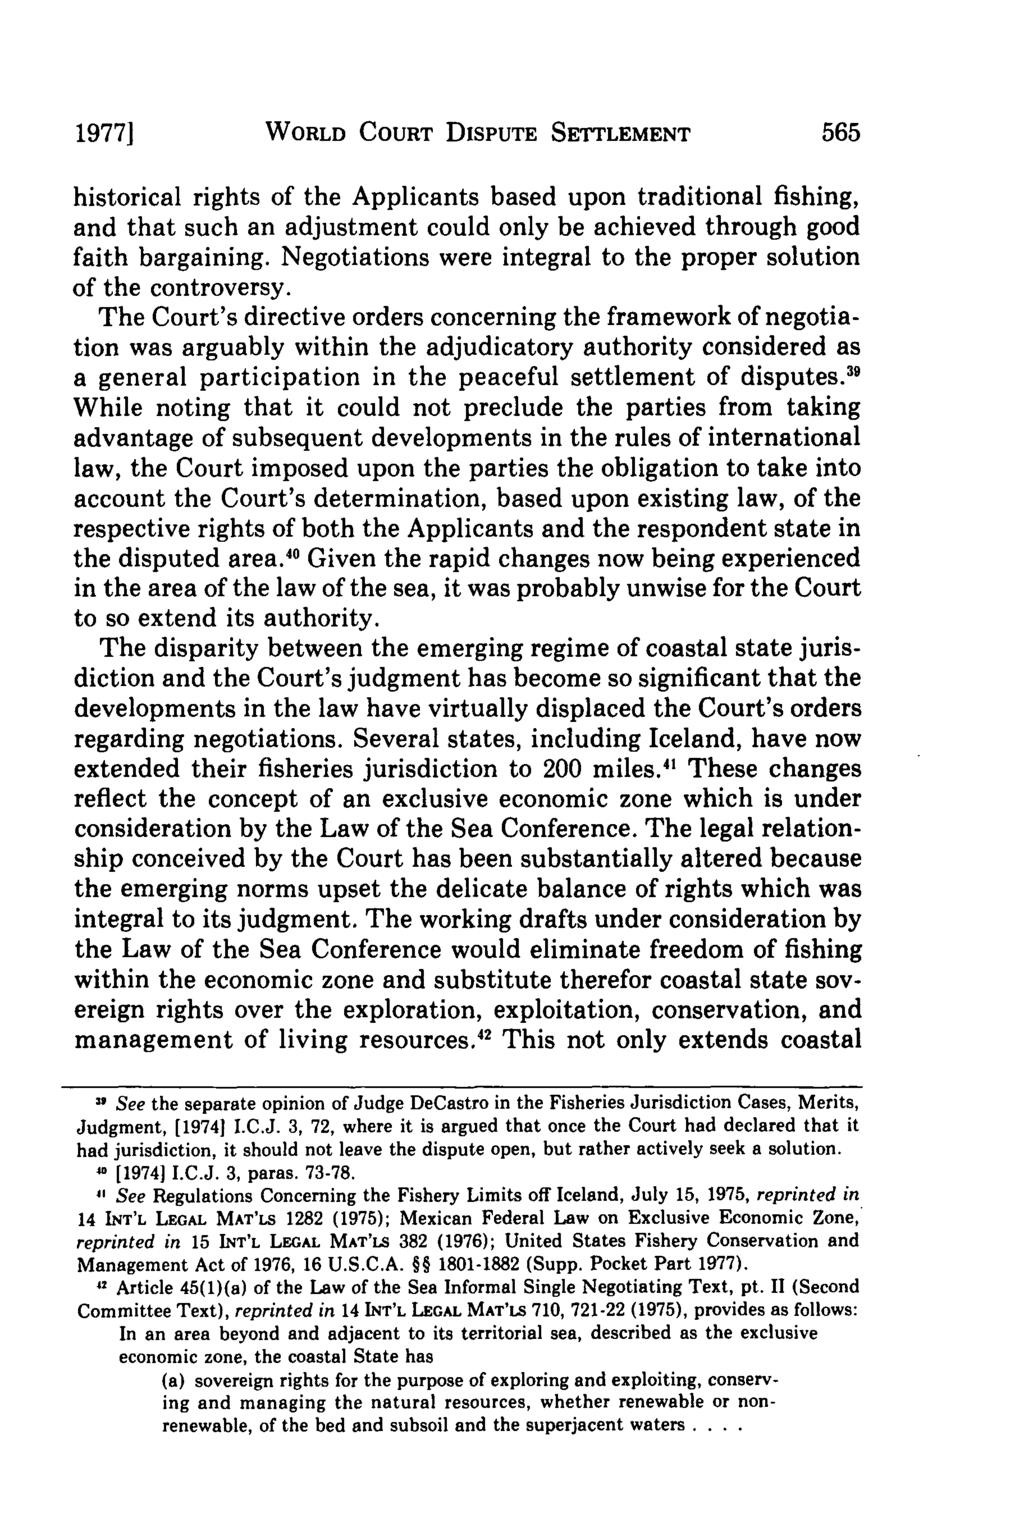 19771 WORLD COURT DISPUTE SETTLEMENT historical rights of the Applicants based upon traditional fishing, and that such an adjustment could only be achieved through good faith bargaining.